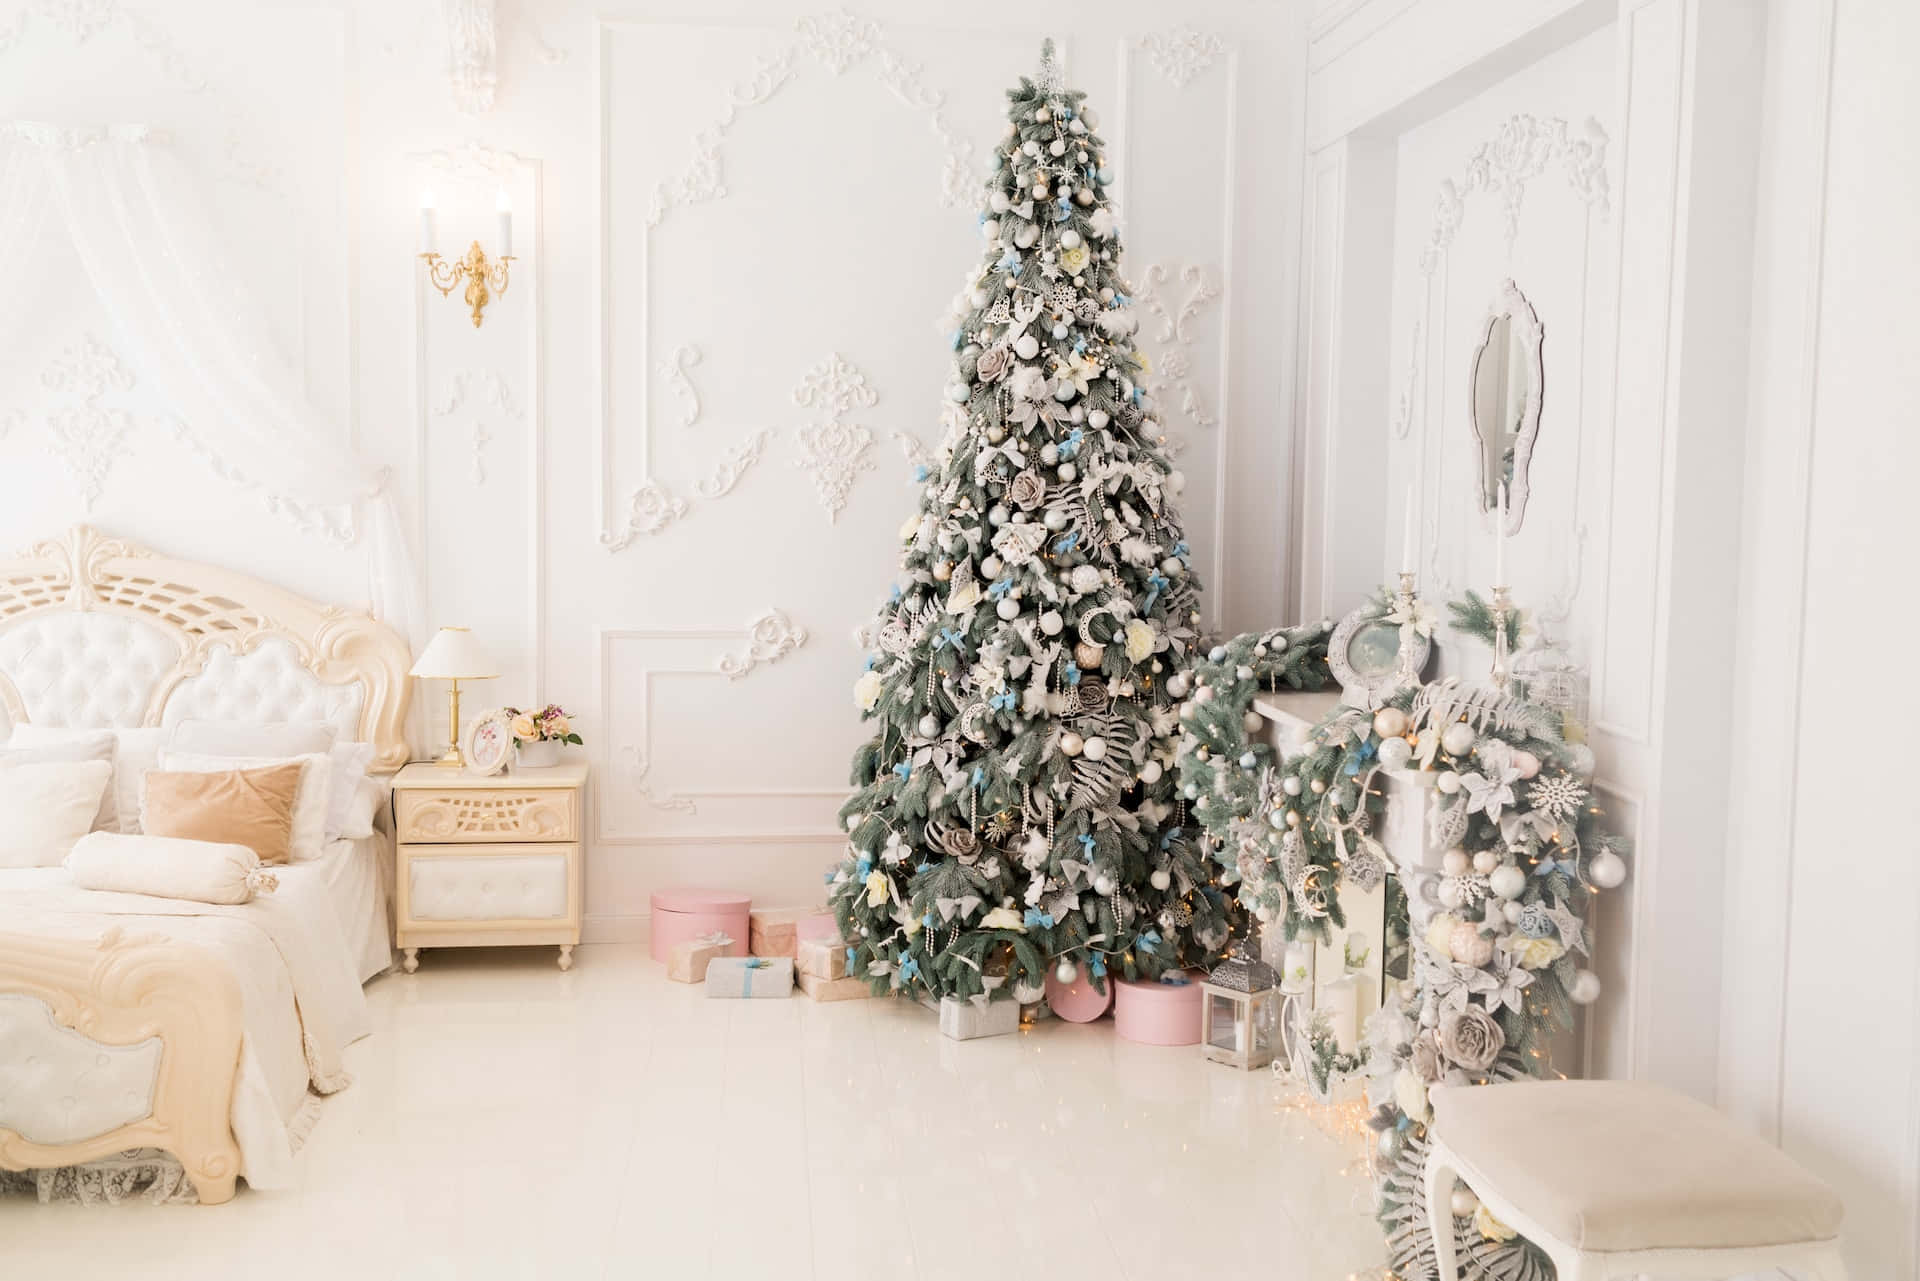 Bring a festive touch of Christmas cheer with this Festive Aesthetic Christmas Tree Wallpaper